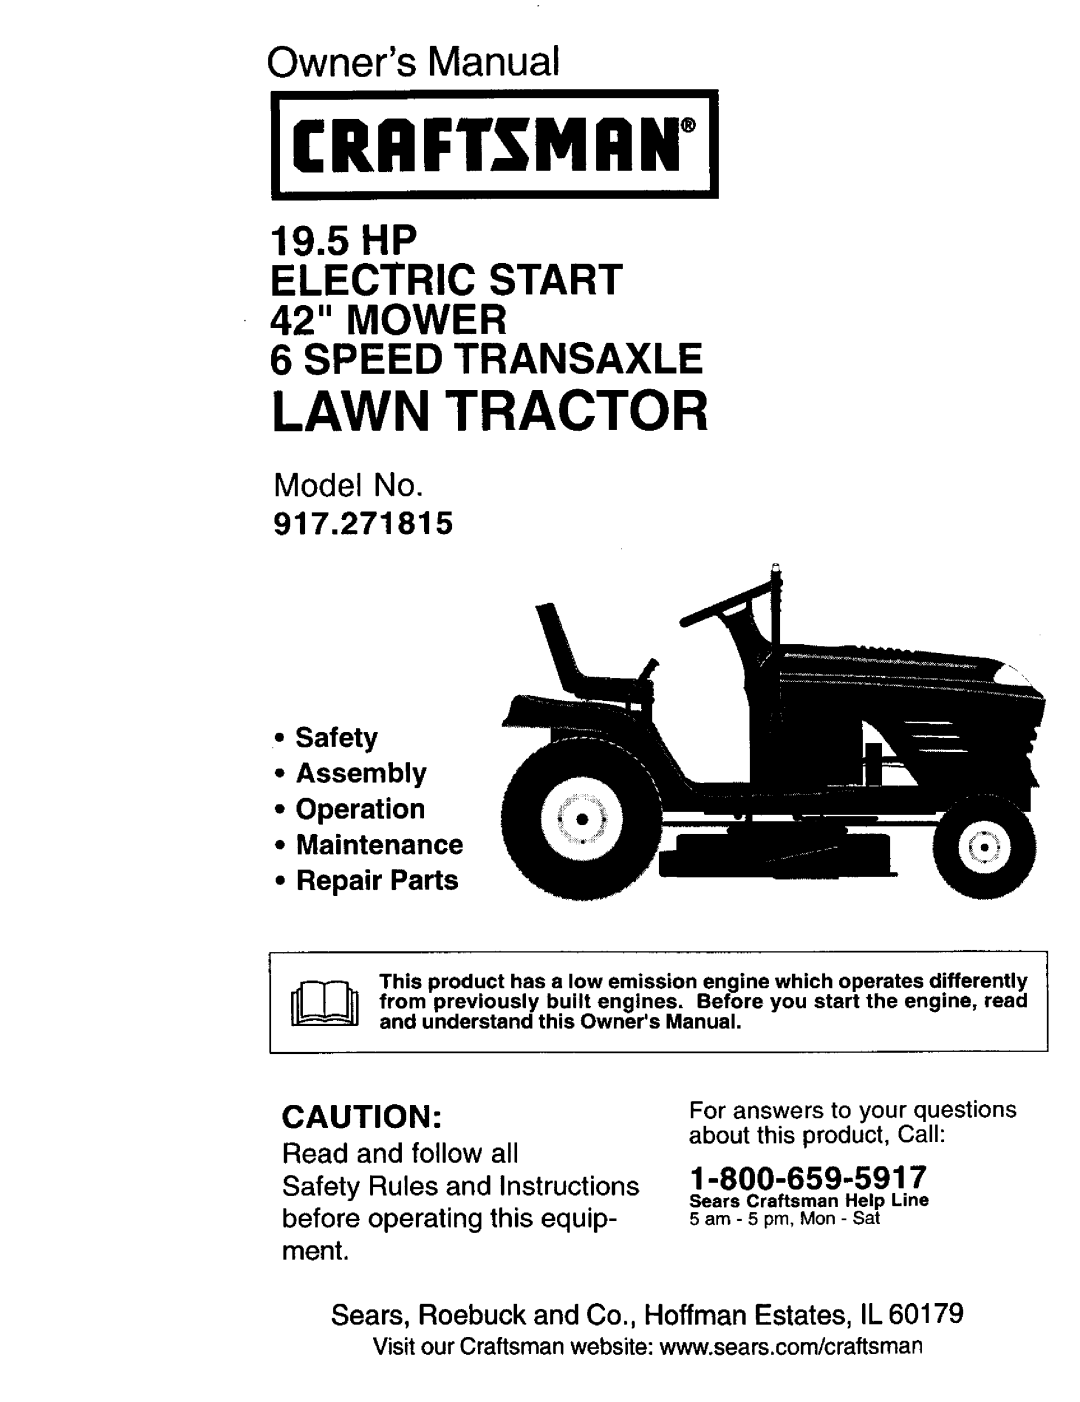 Craftsman 917.271815 owner manual Lawn Tractor, 9.5 HP, Mower, Model No, •Safety •Assembly •Operation •Maintenance 